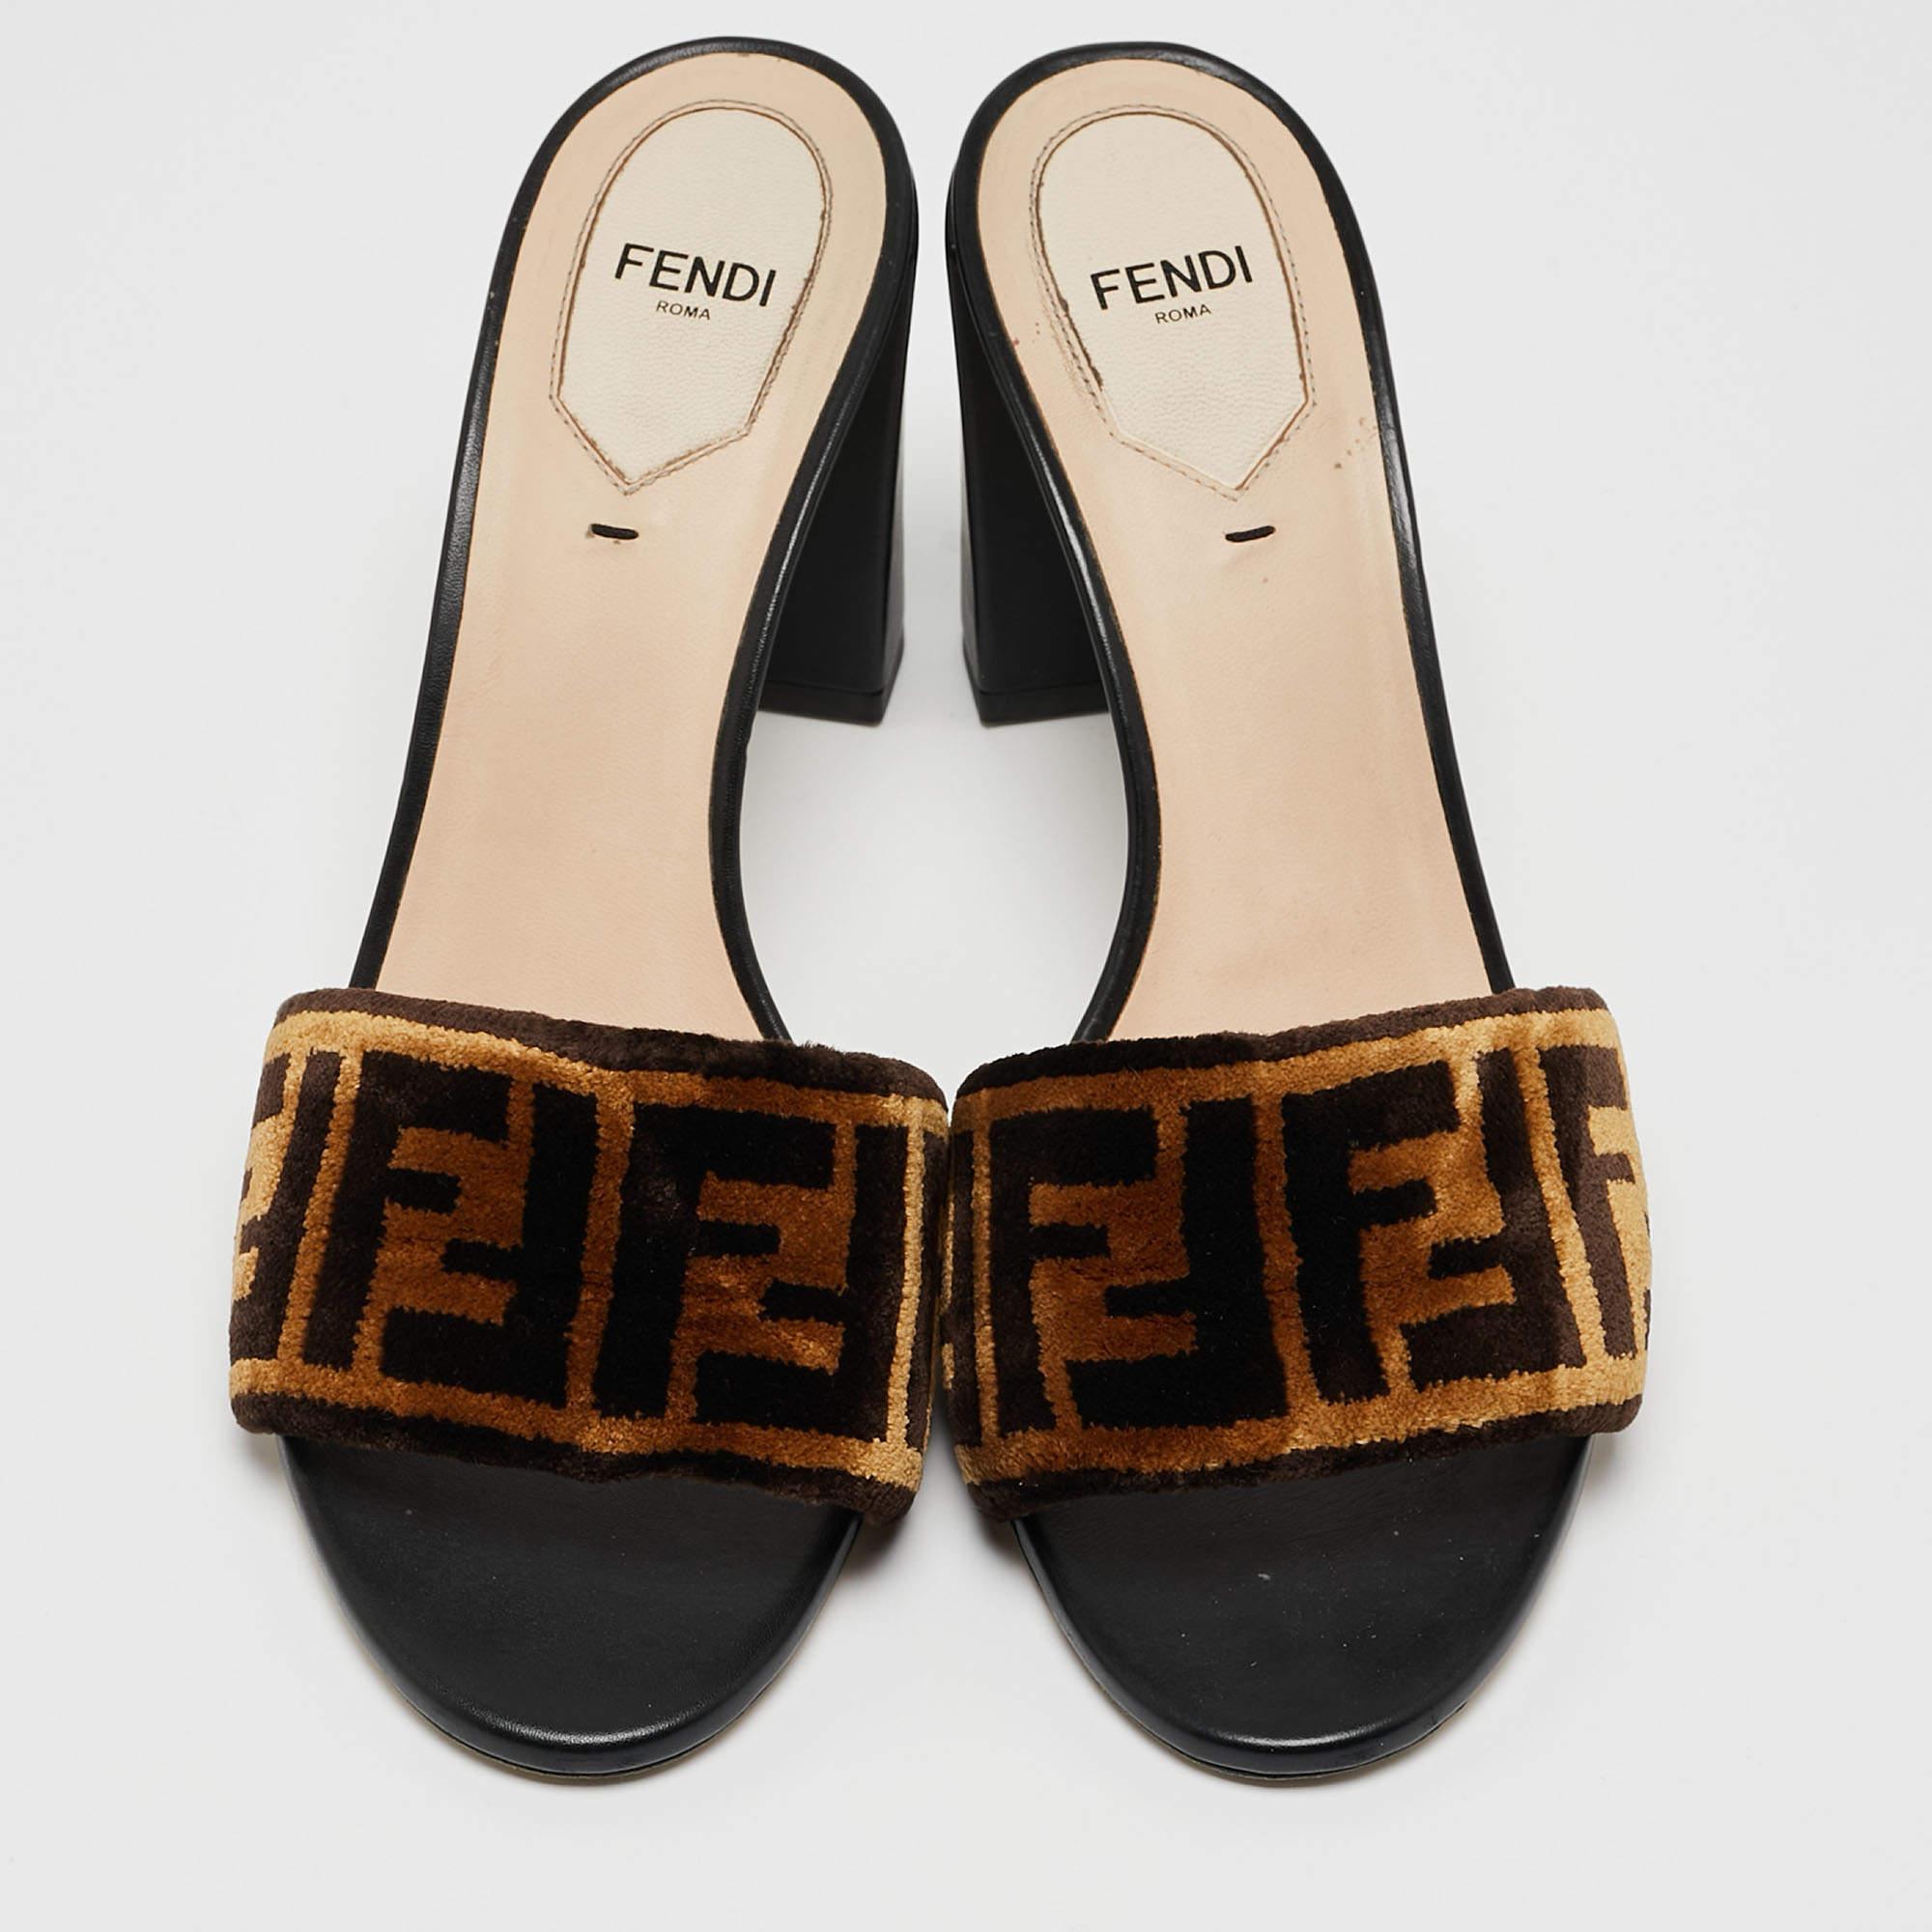 Wonderfully crafted shoes added with notable elements to fit well and pair perfectly with all your plans. Make these Fendi slide sandals yours today!

Includes: Original Dustbag, Original Box, Info Booklet, Invoice